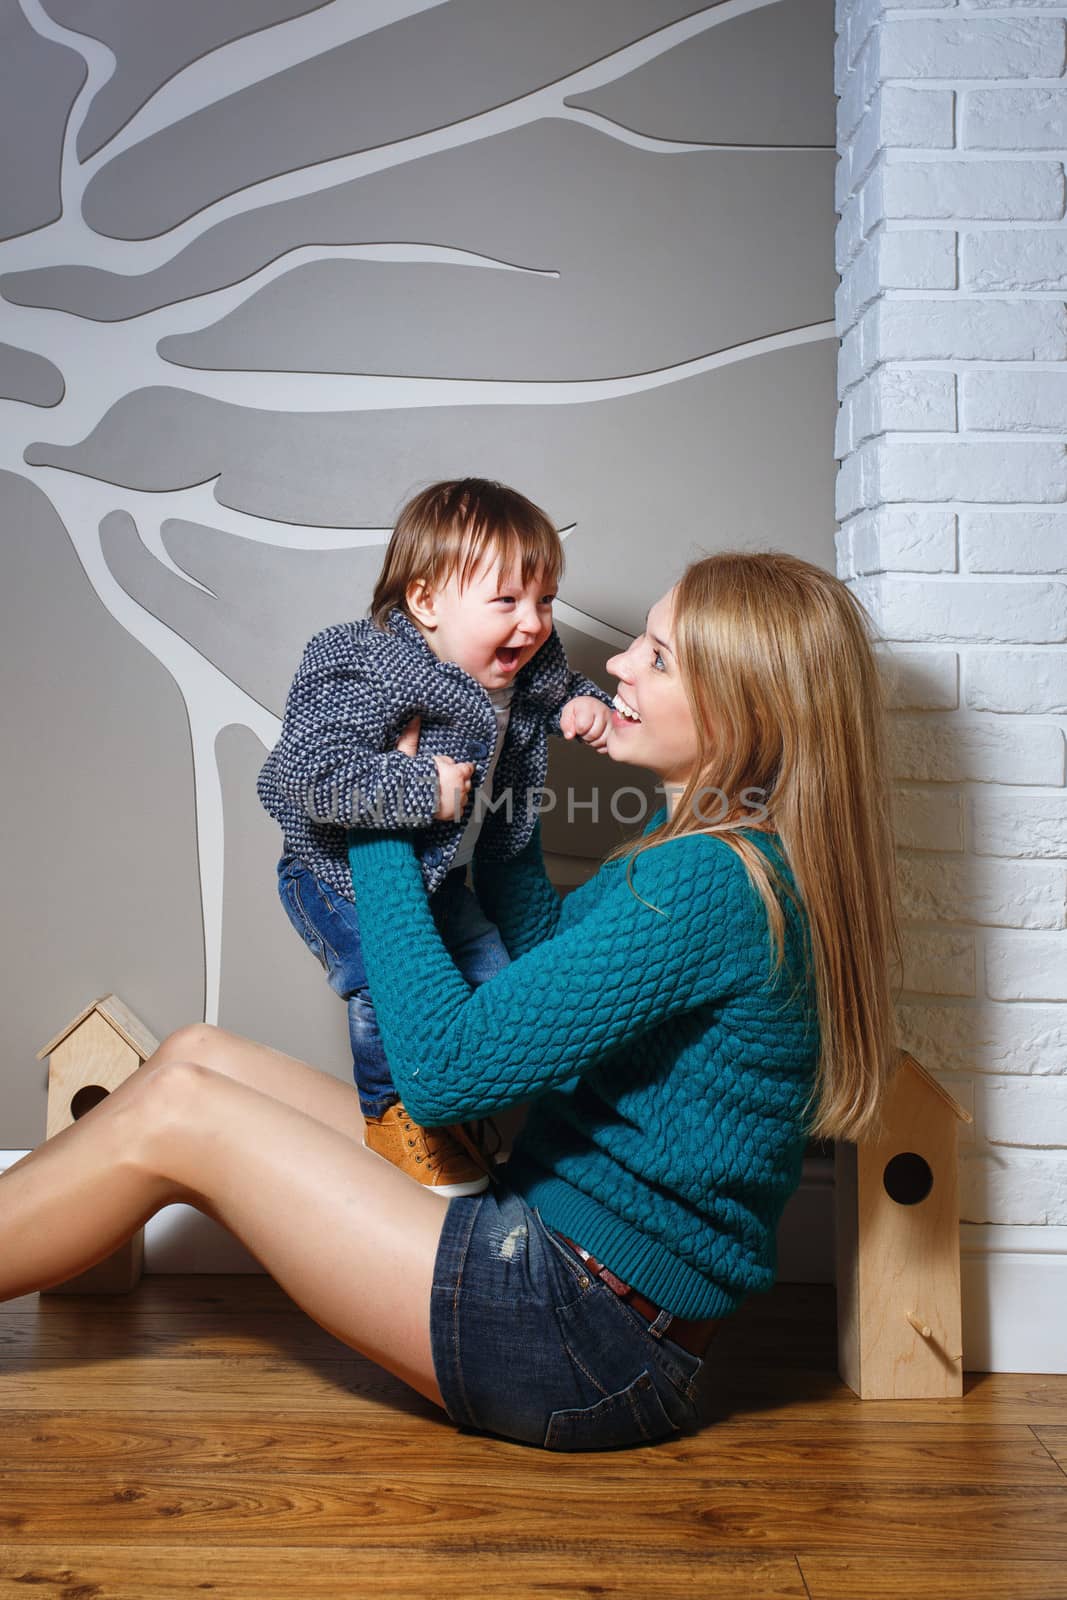 Attractive young blond mother holding her baby in her arms